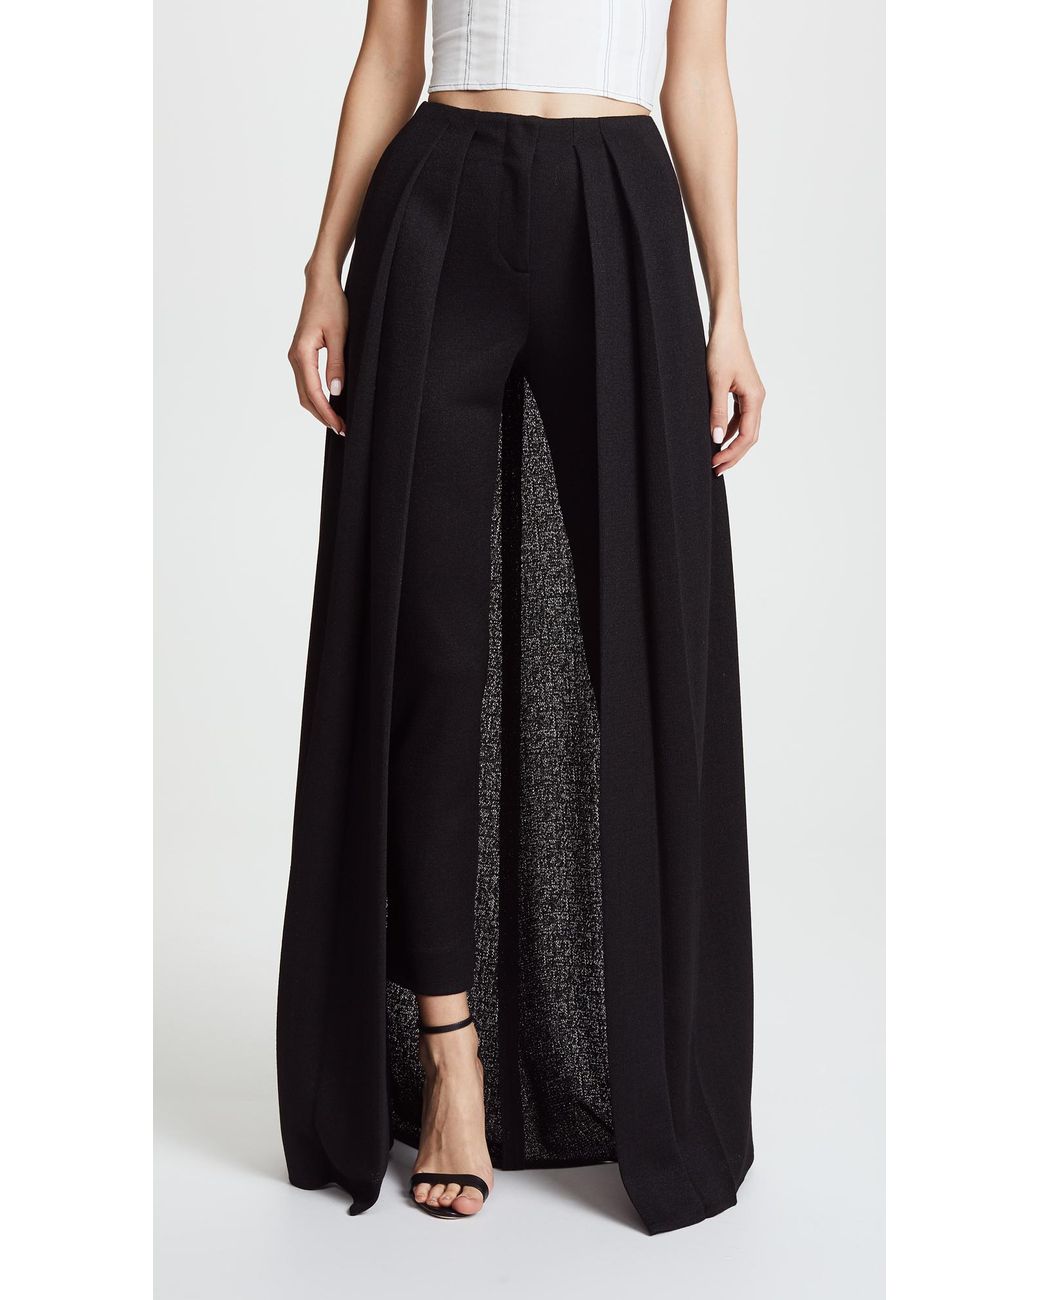 TROUSERS WITH OVERLAID SKIRT  View all  Trousers  MAN  Fashion Skirts  Skirt fashion